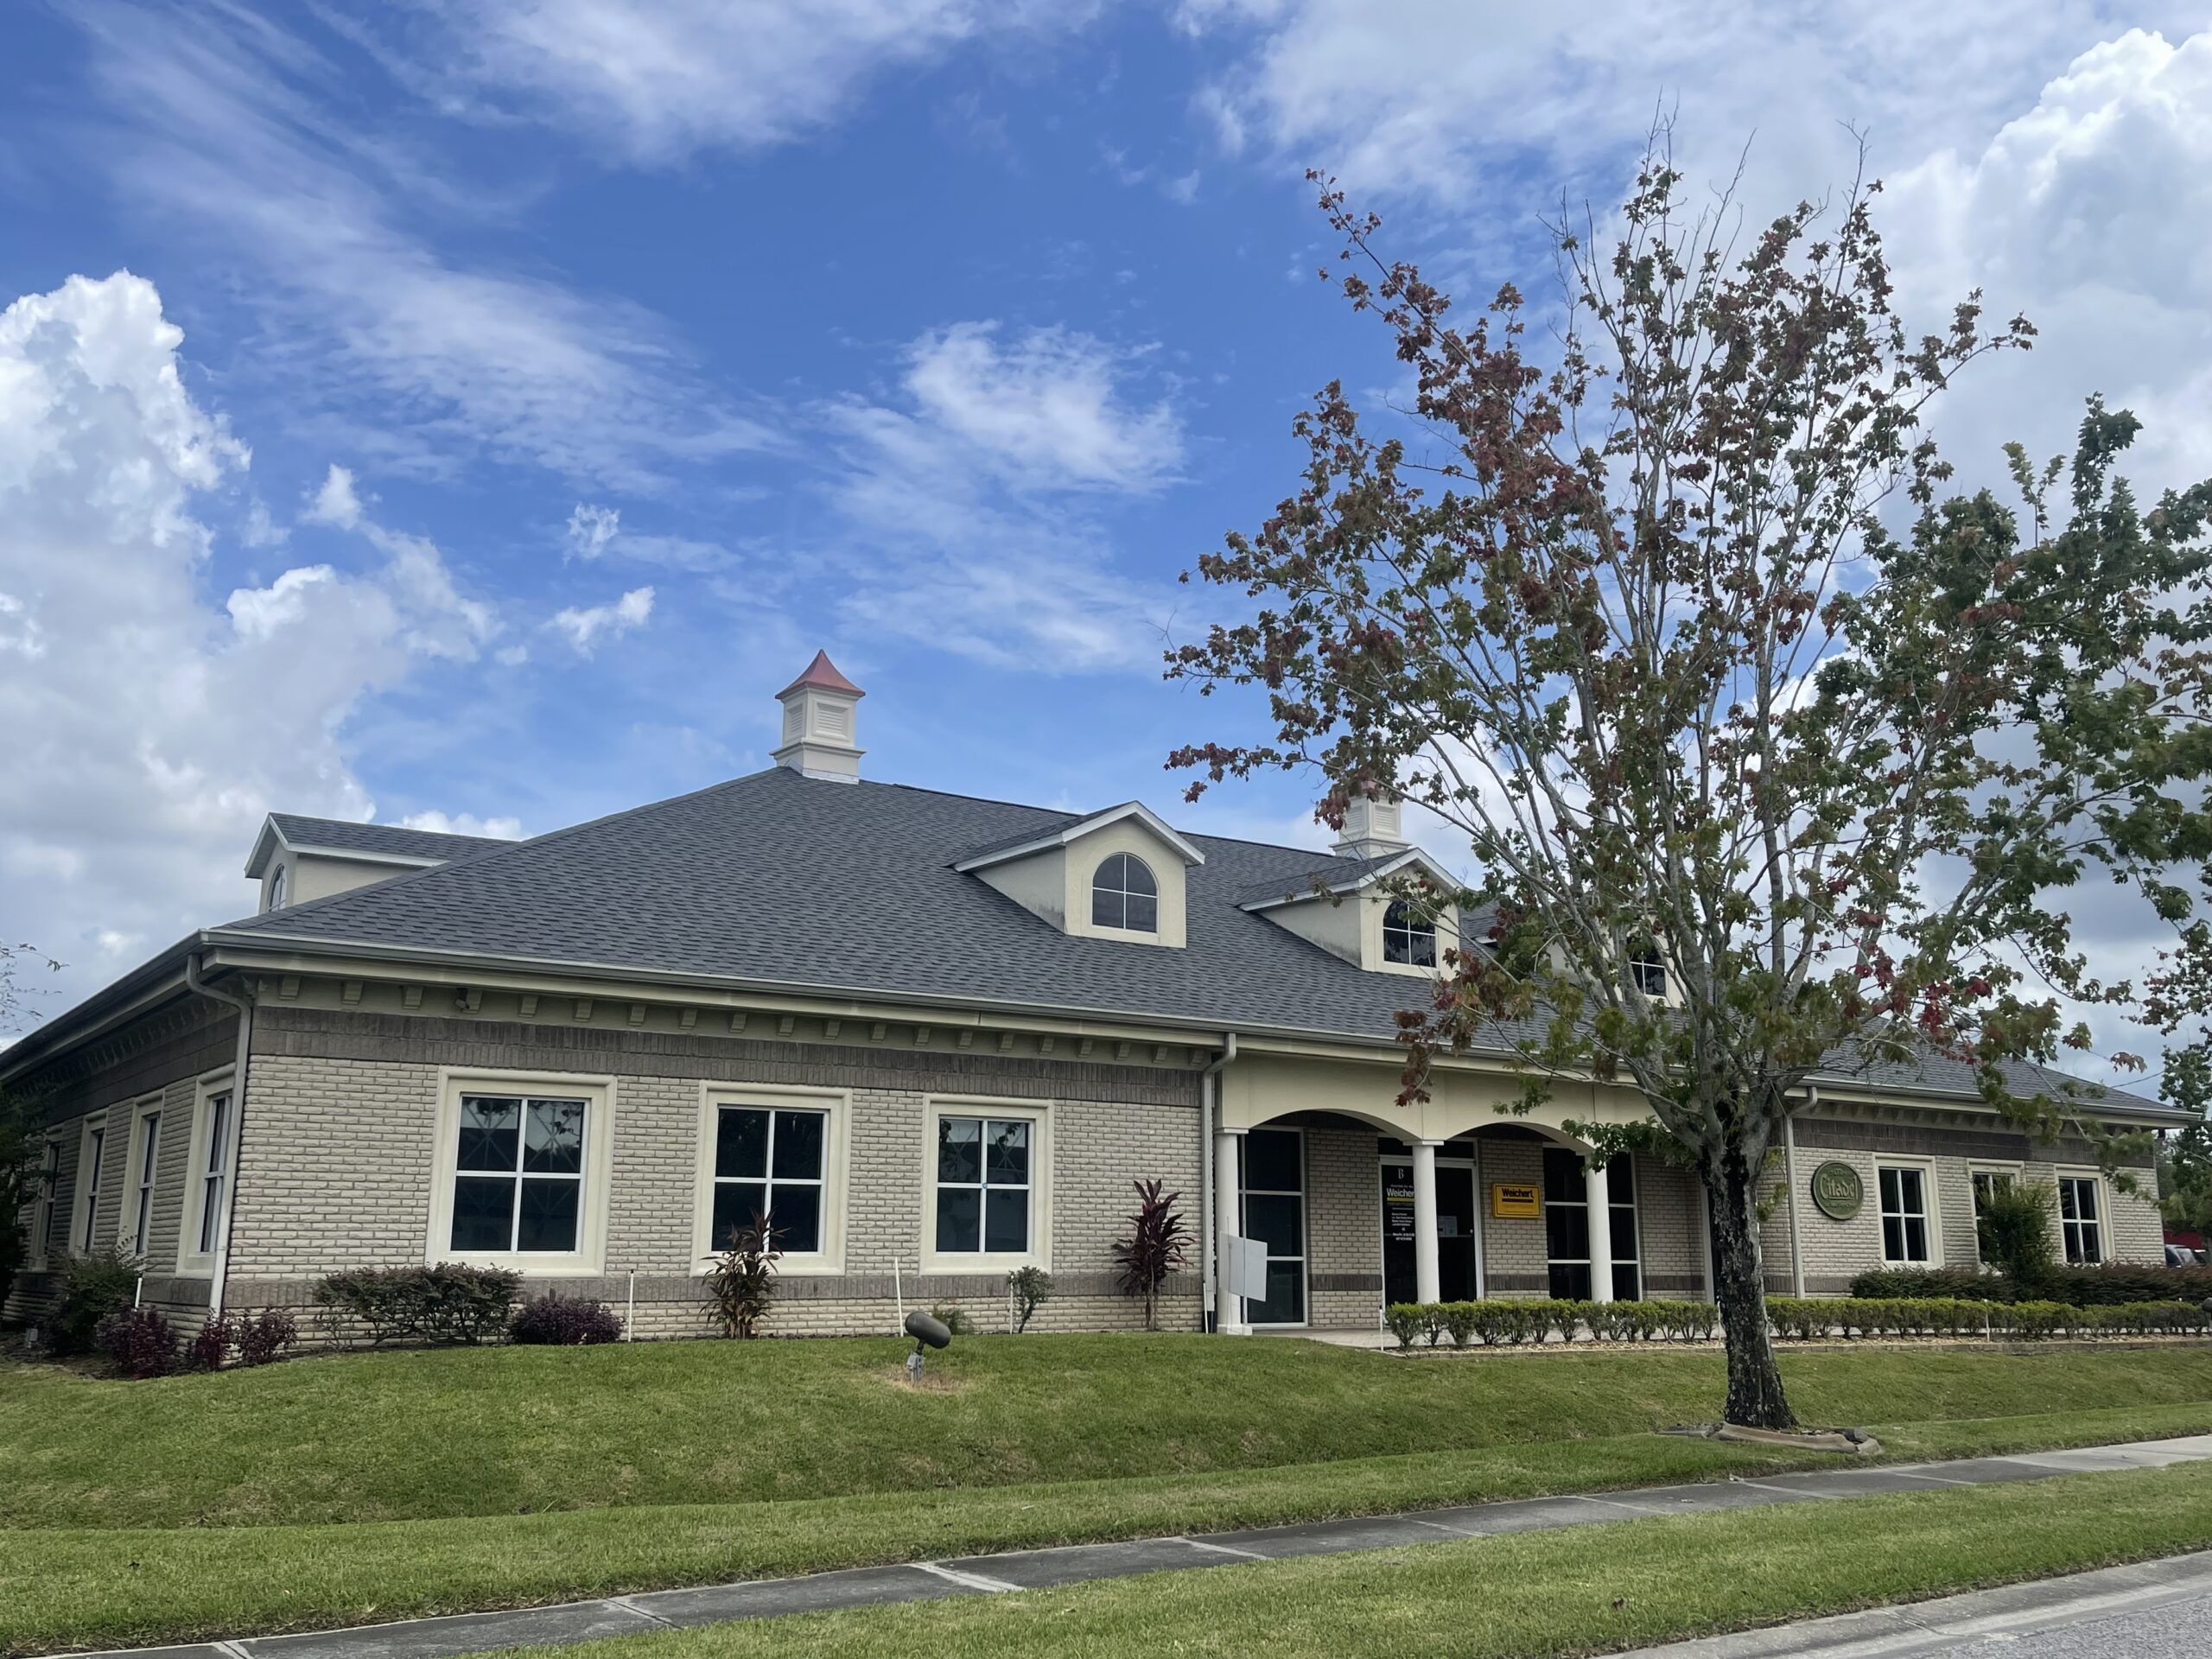 KISSIMMEE PROFESSIONAL OFFICE BUILDING SELLS